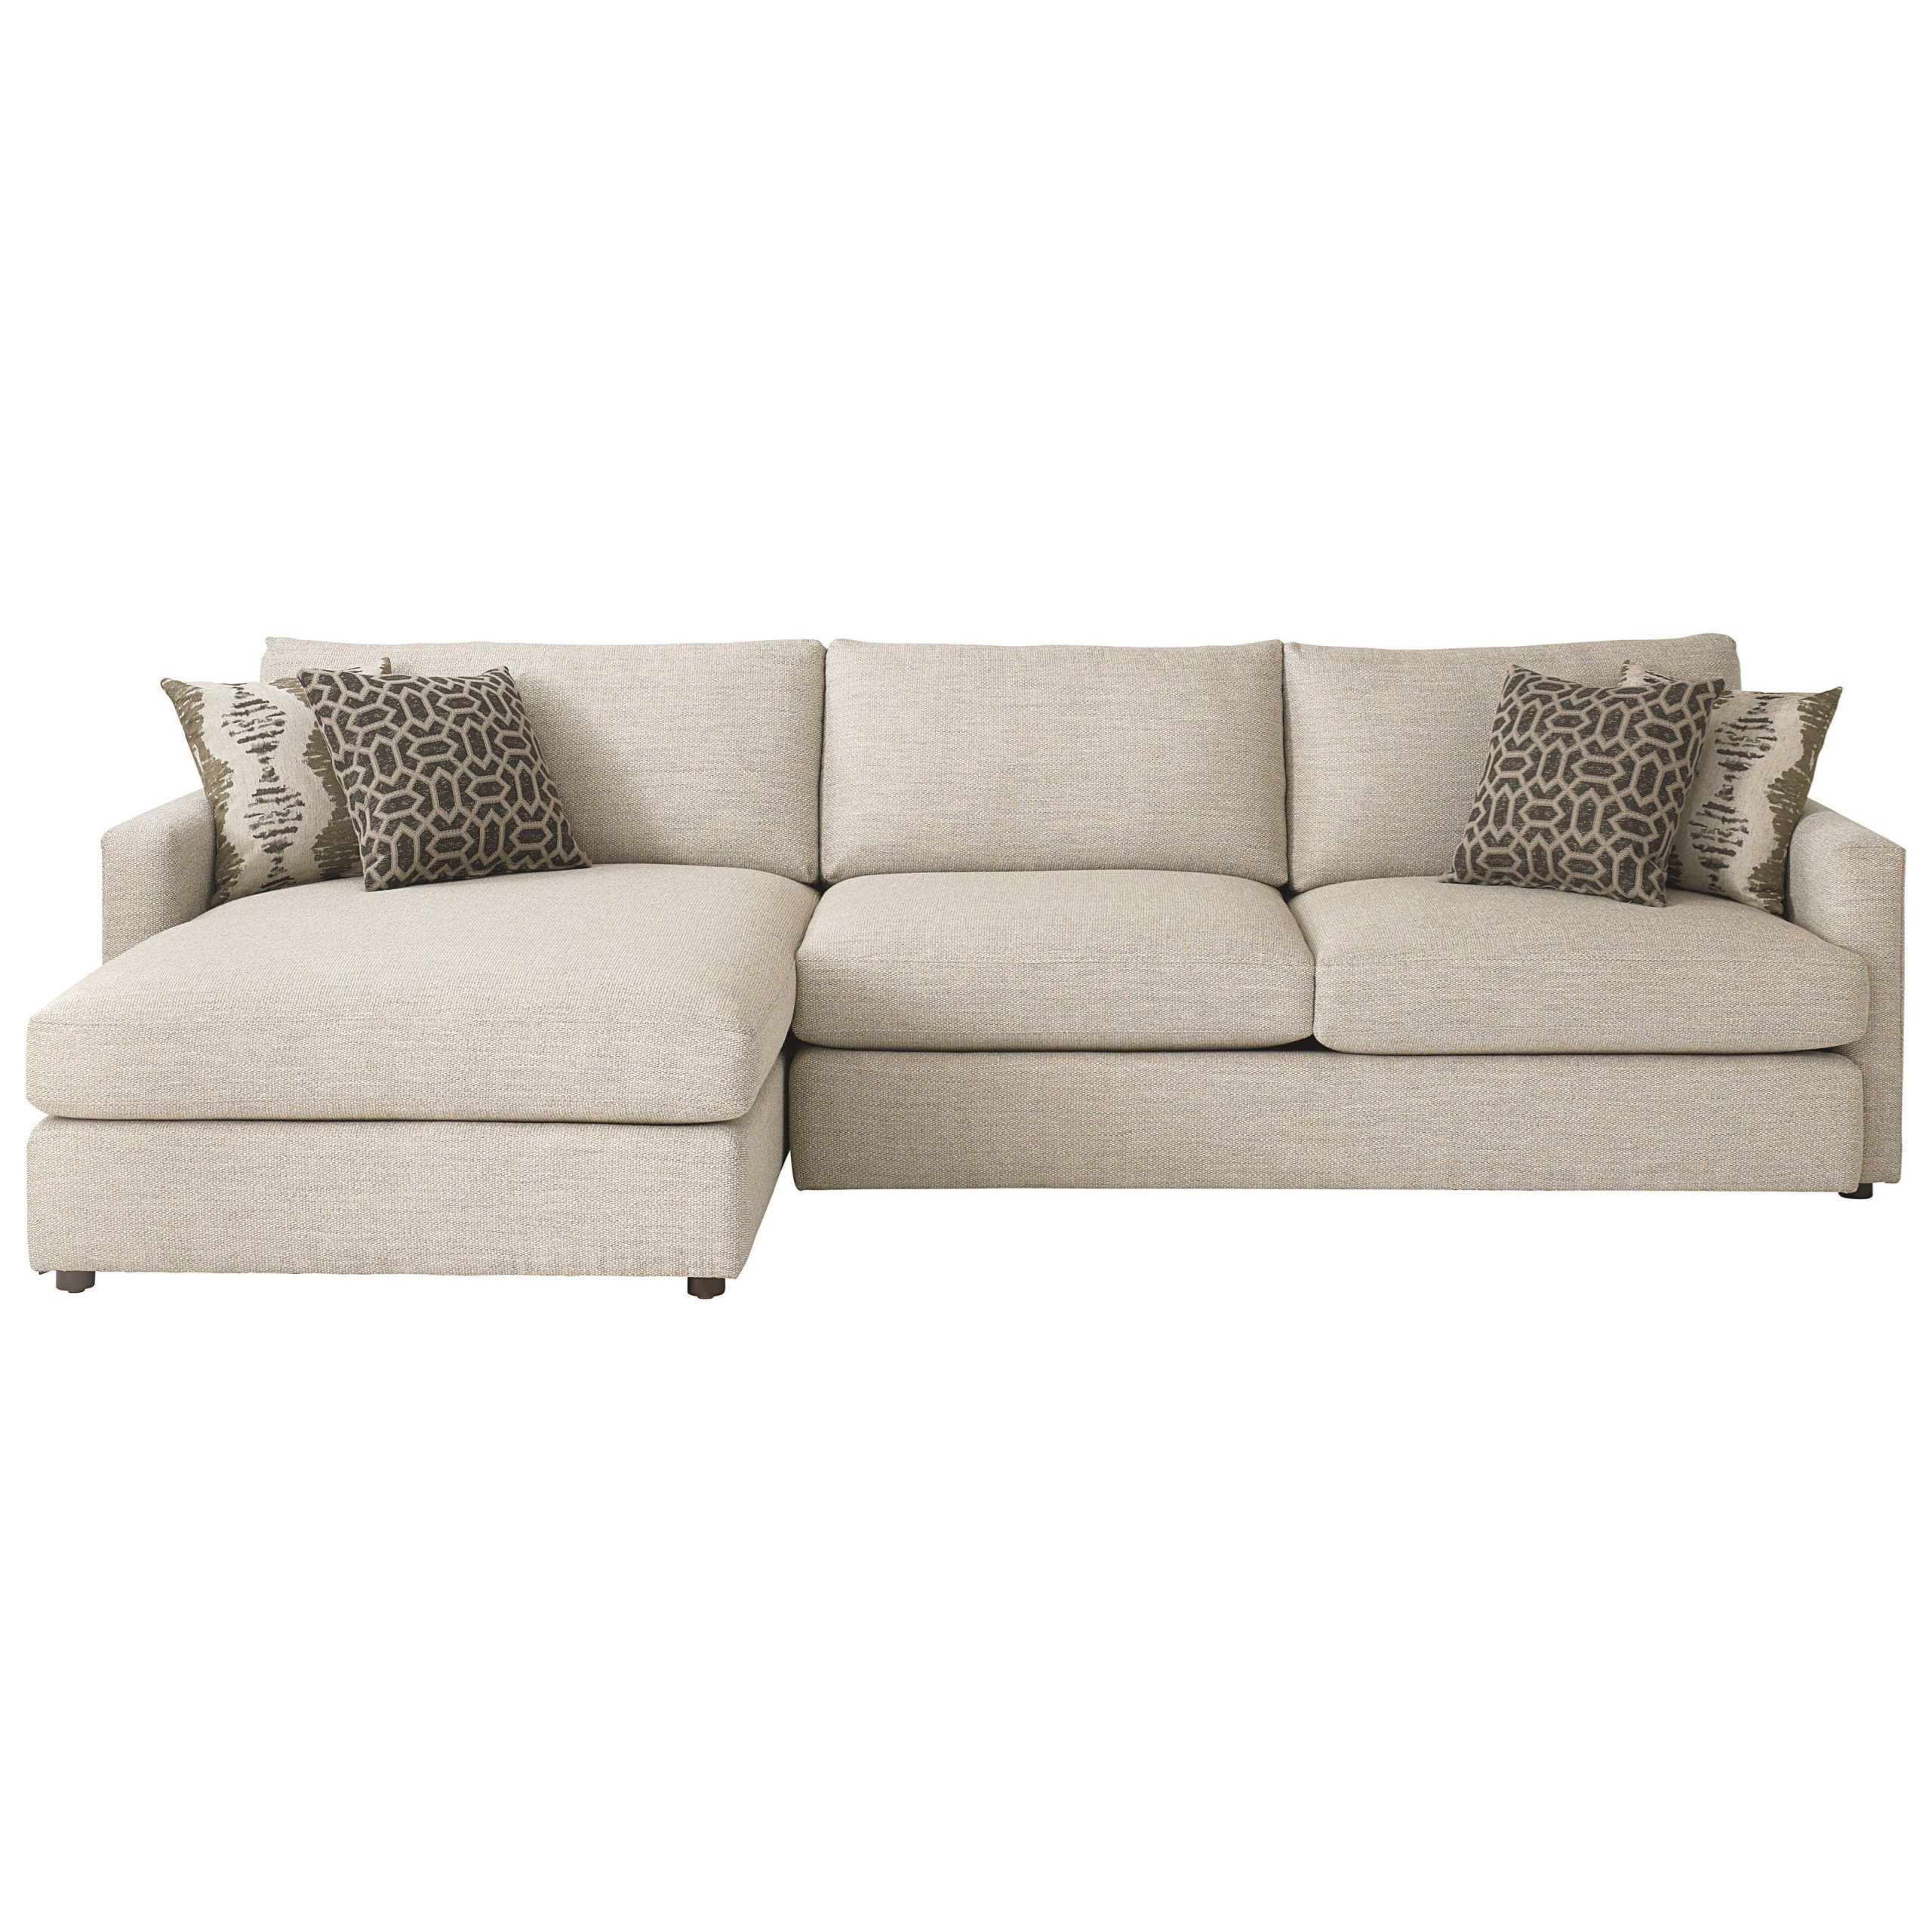 Bassett Allure Contemporary Sectional With Left Arm Facing Chaise Intended For Left Or Right Facing Sleeper Sectionals (View 19 of 21)